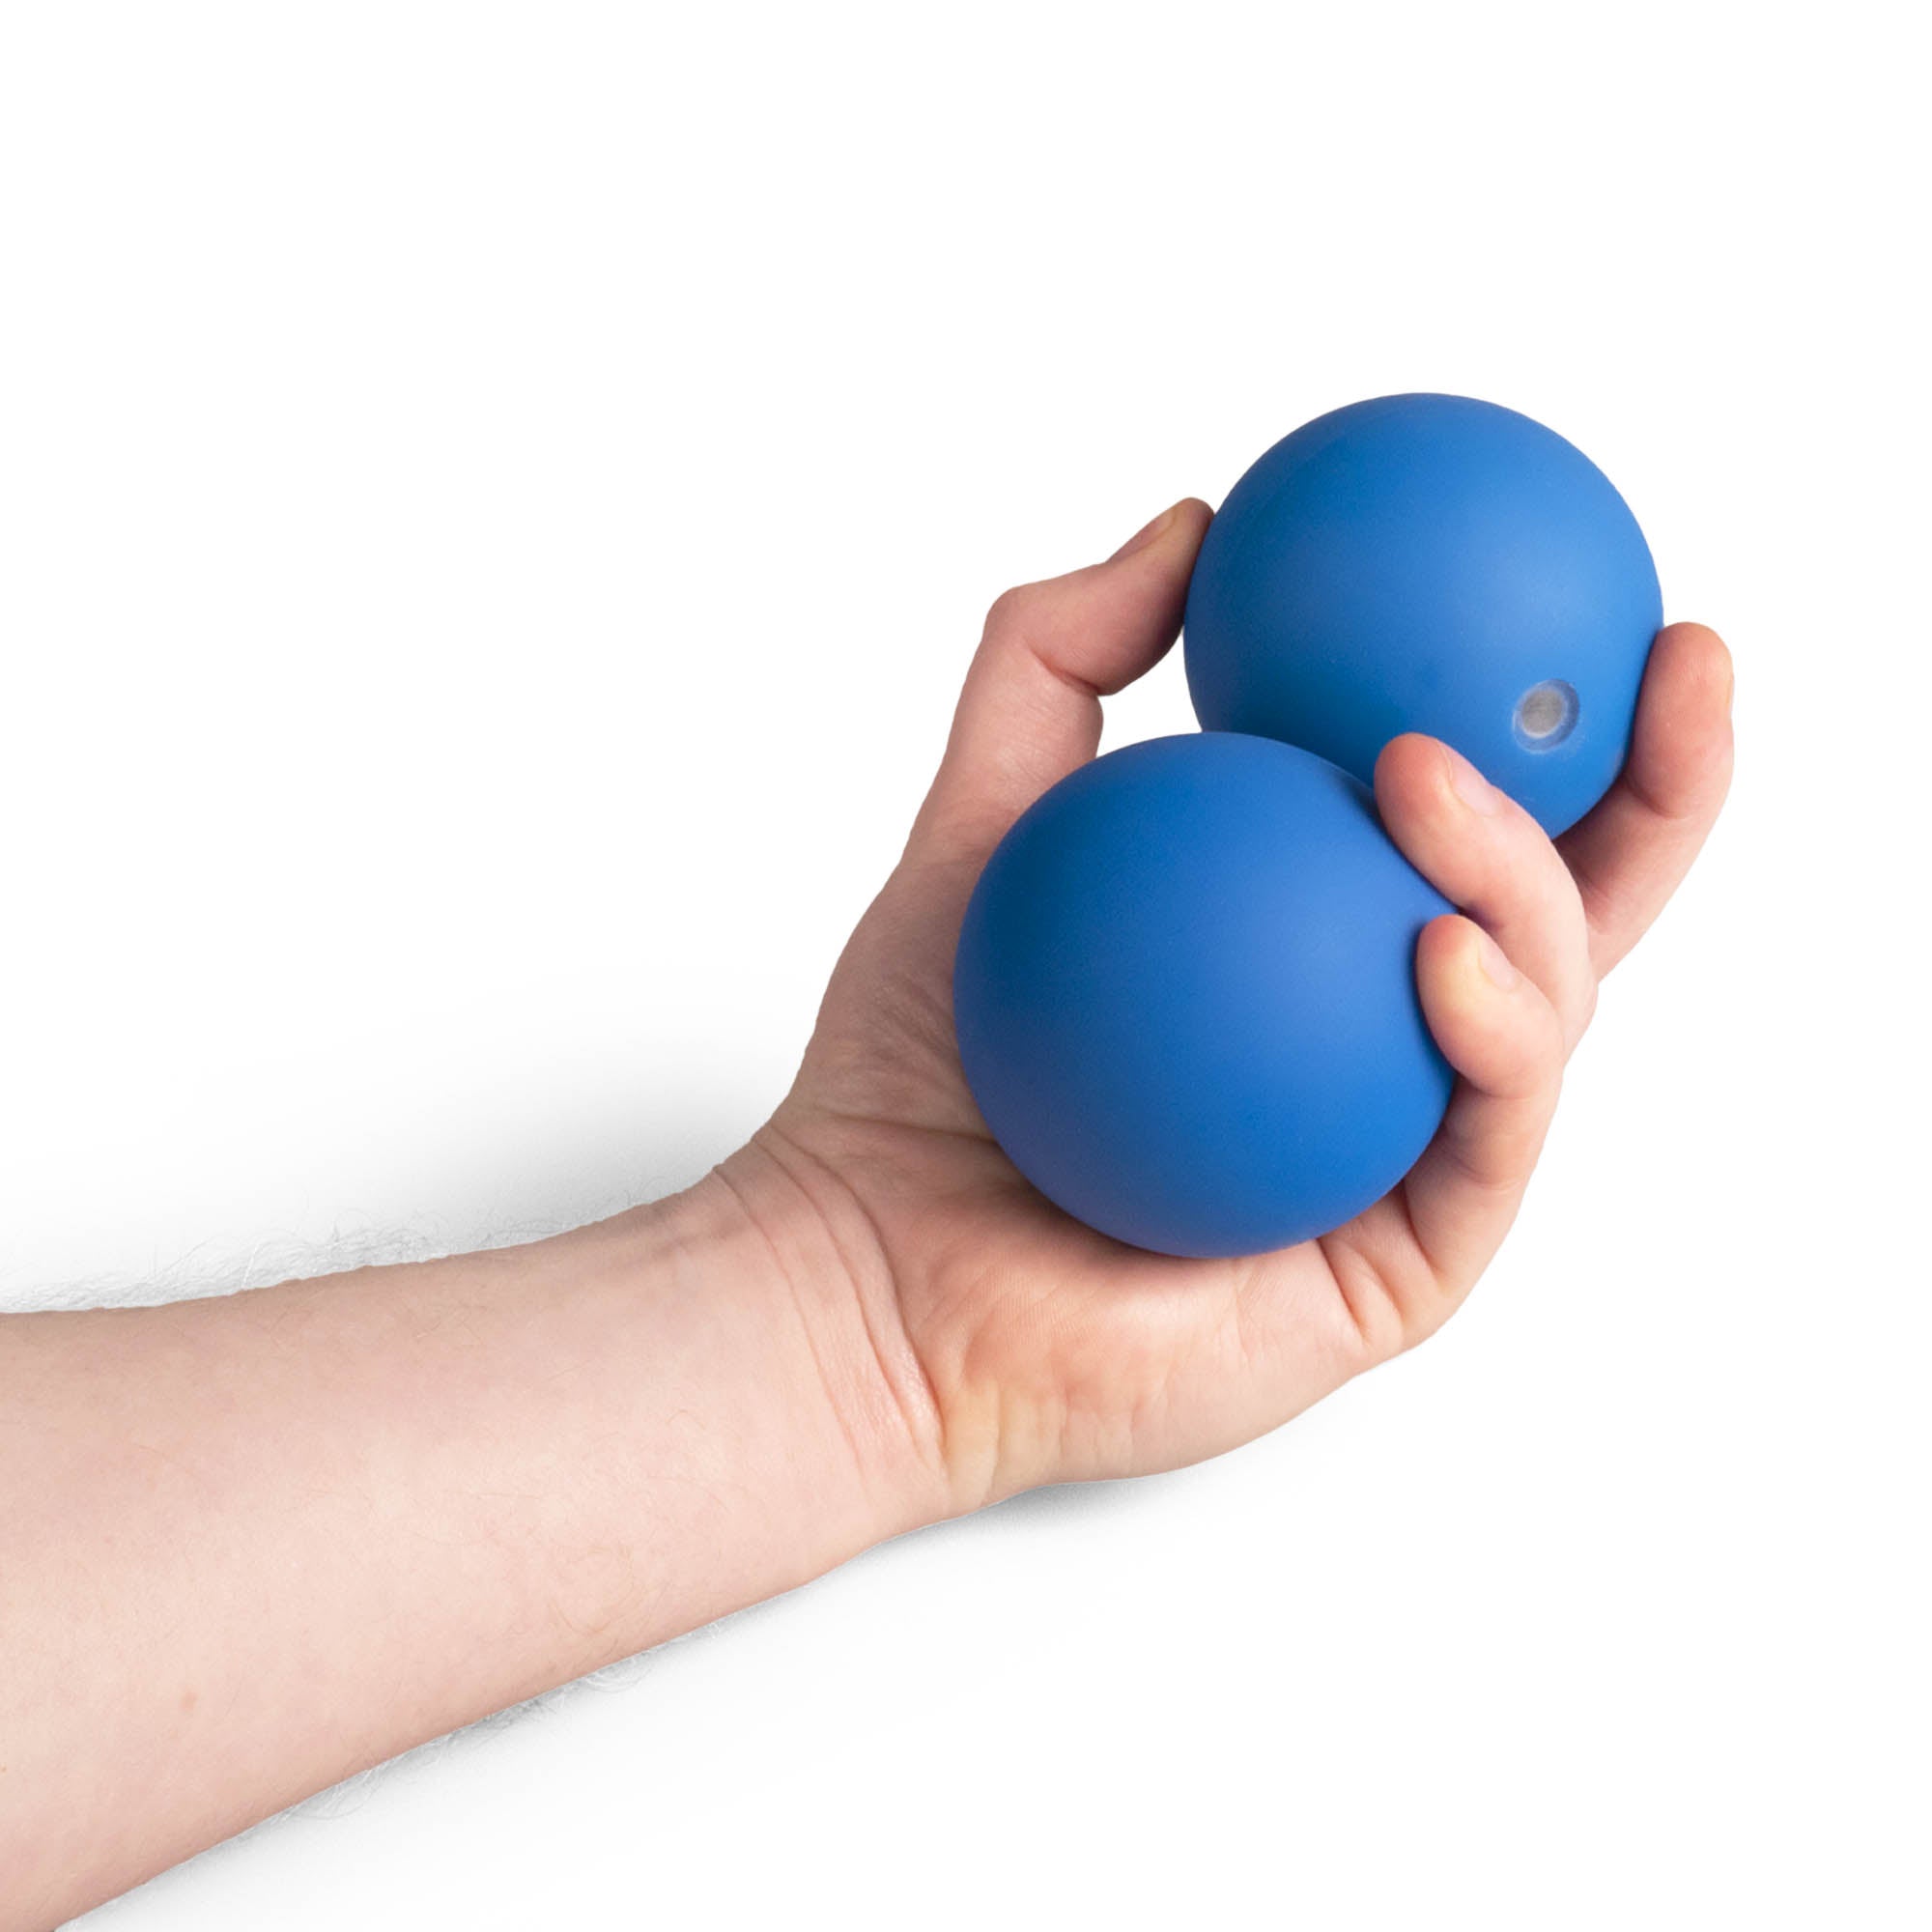 Two blue Mr Babache russian juggling balls in hand